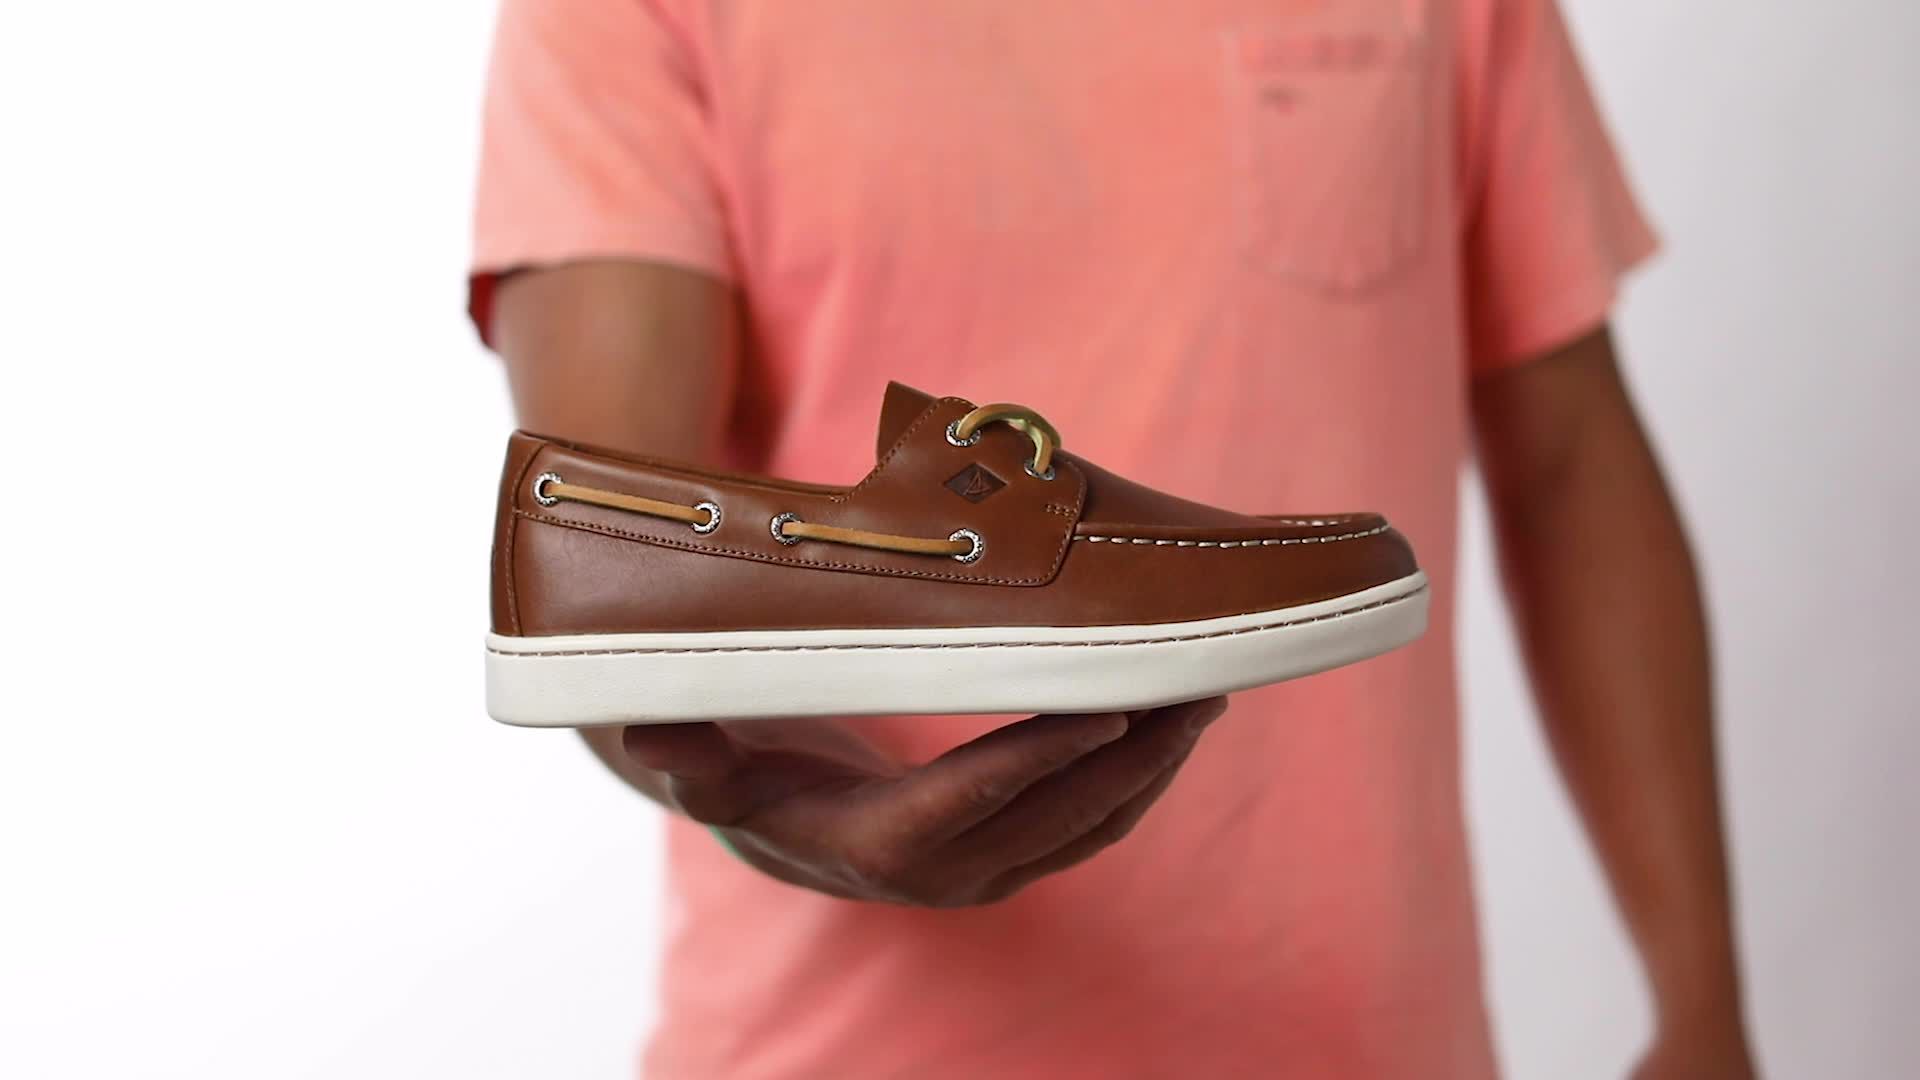 sperry at tanger outlet